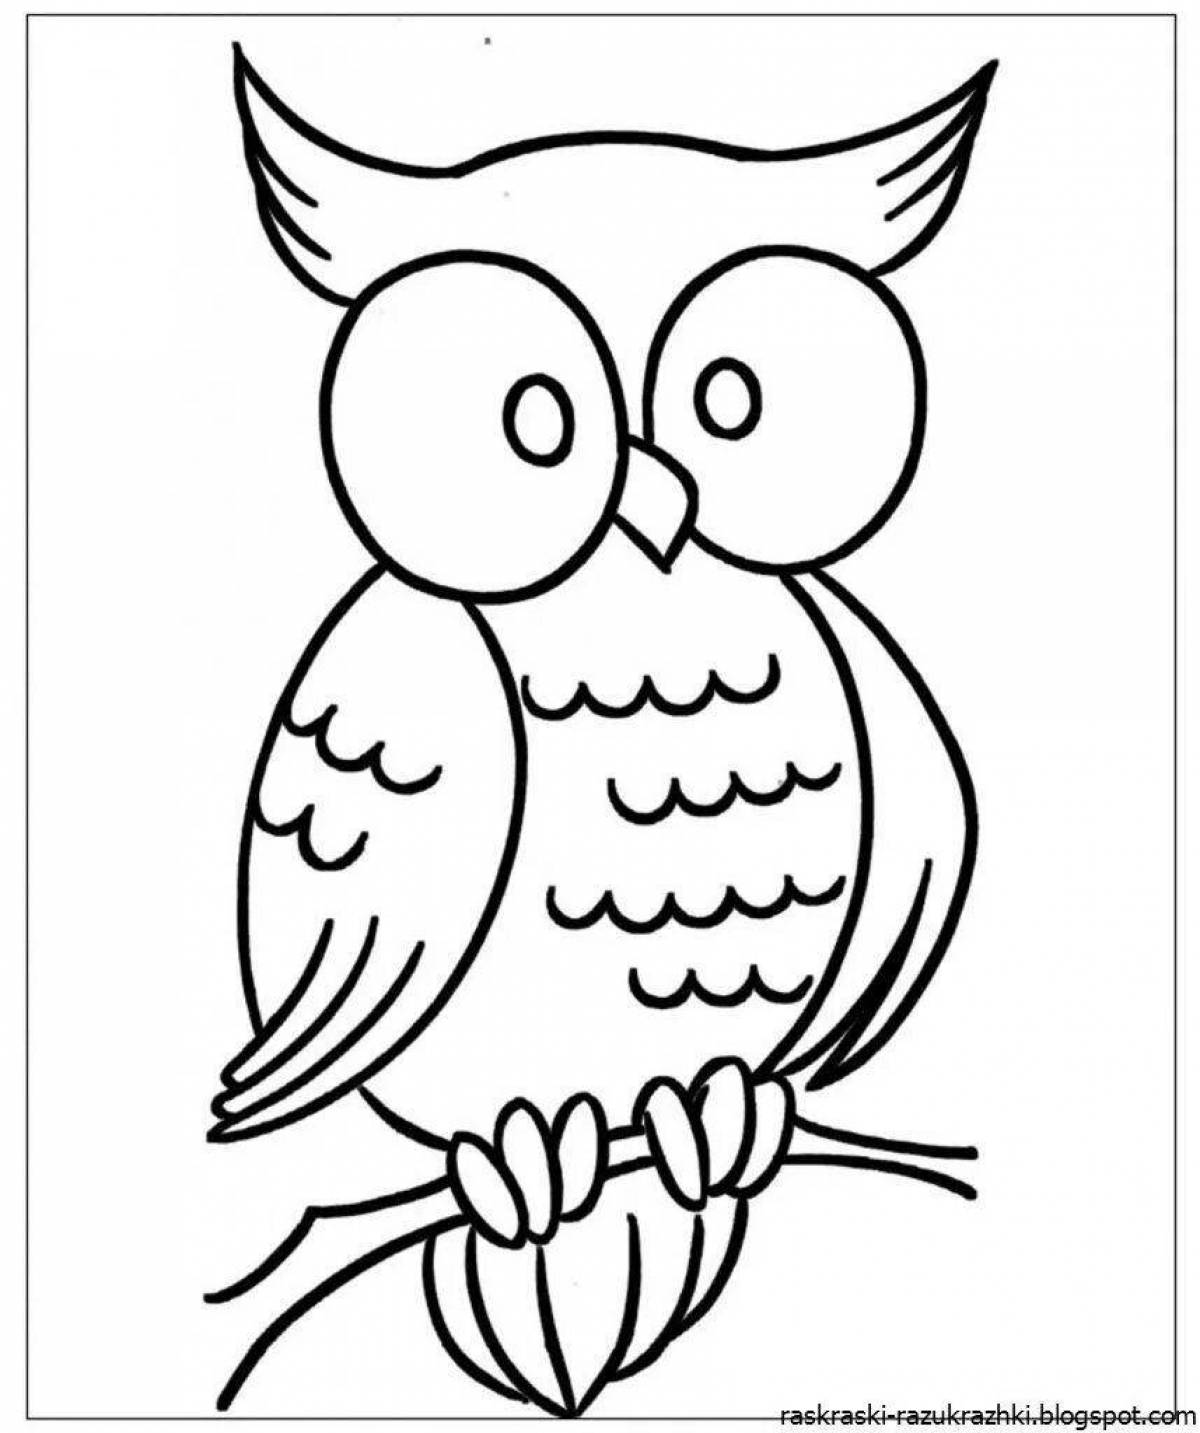 Incredible owl coloring book for kids